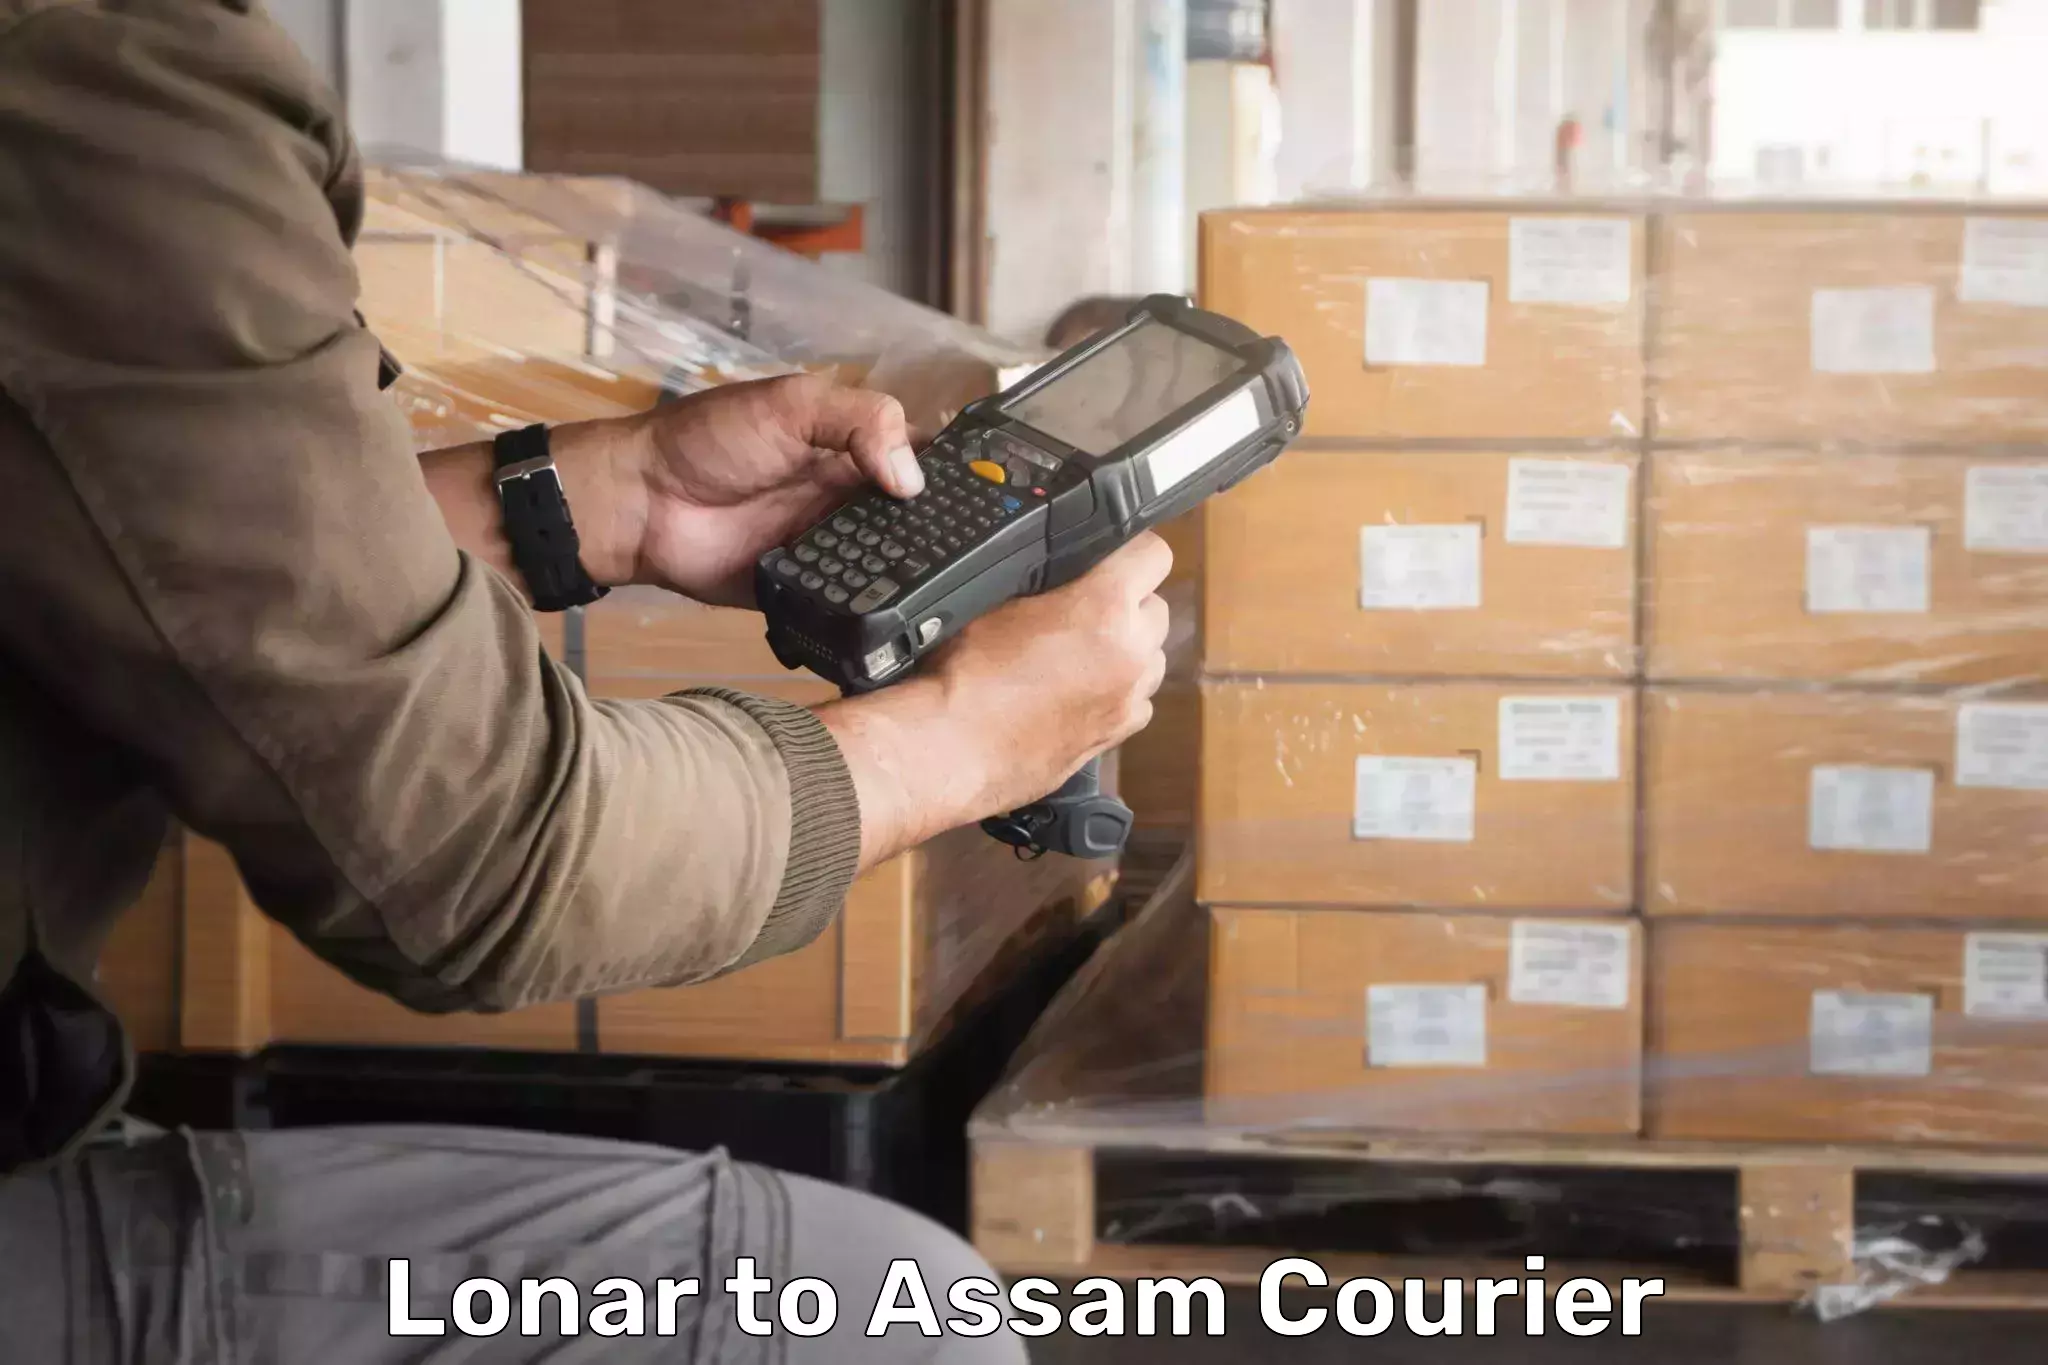 Next day courier Lonar to Rupai Siding